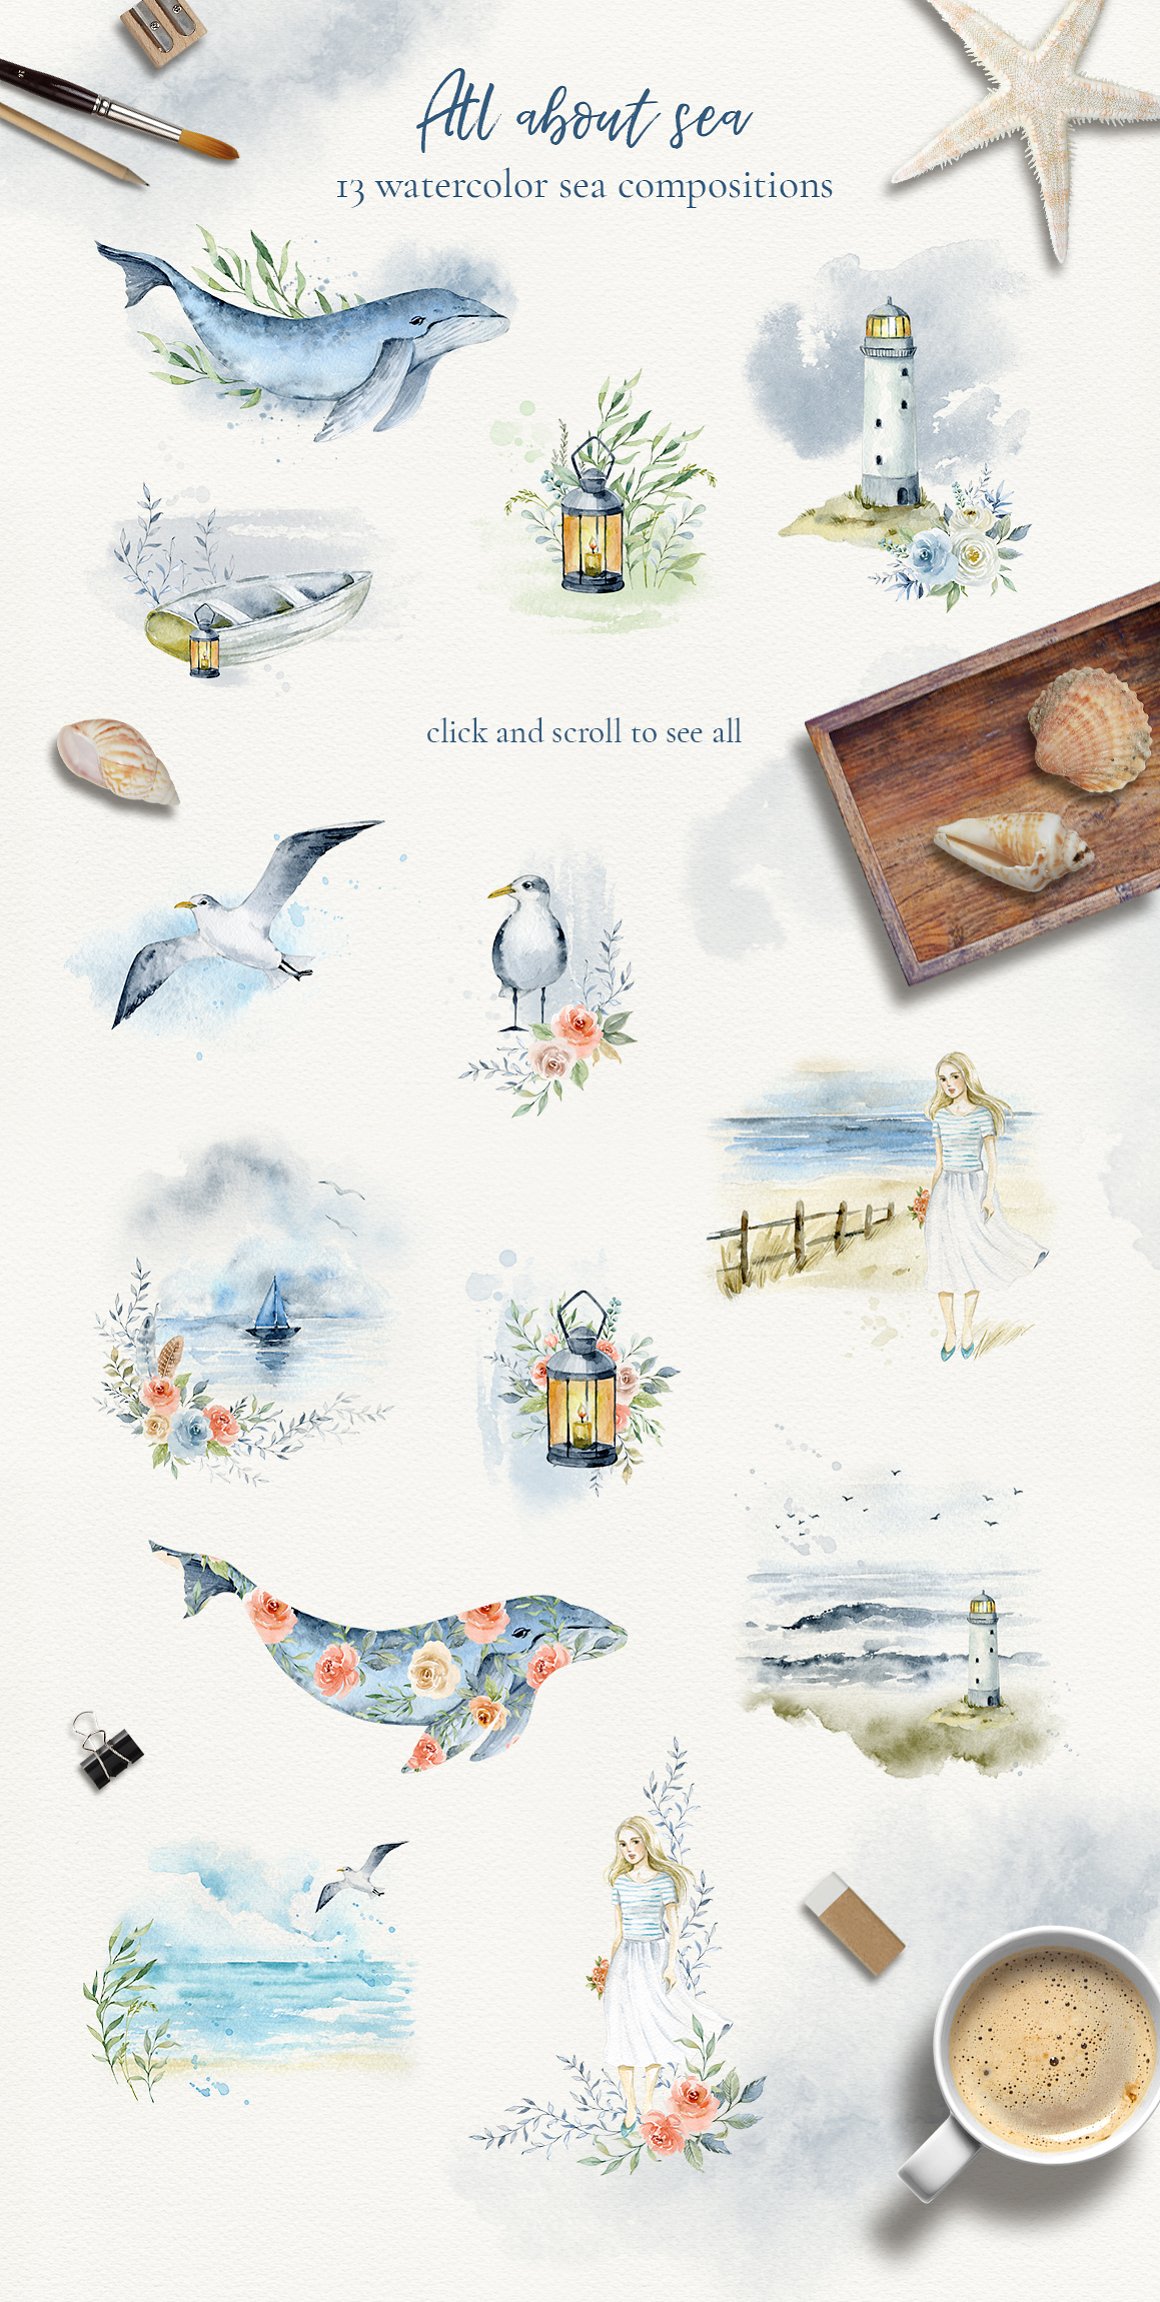 13 watercolor sea compositions on a gray background.